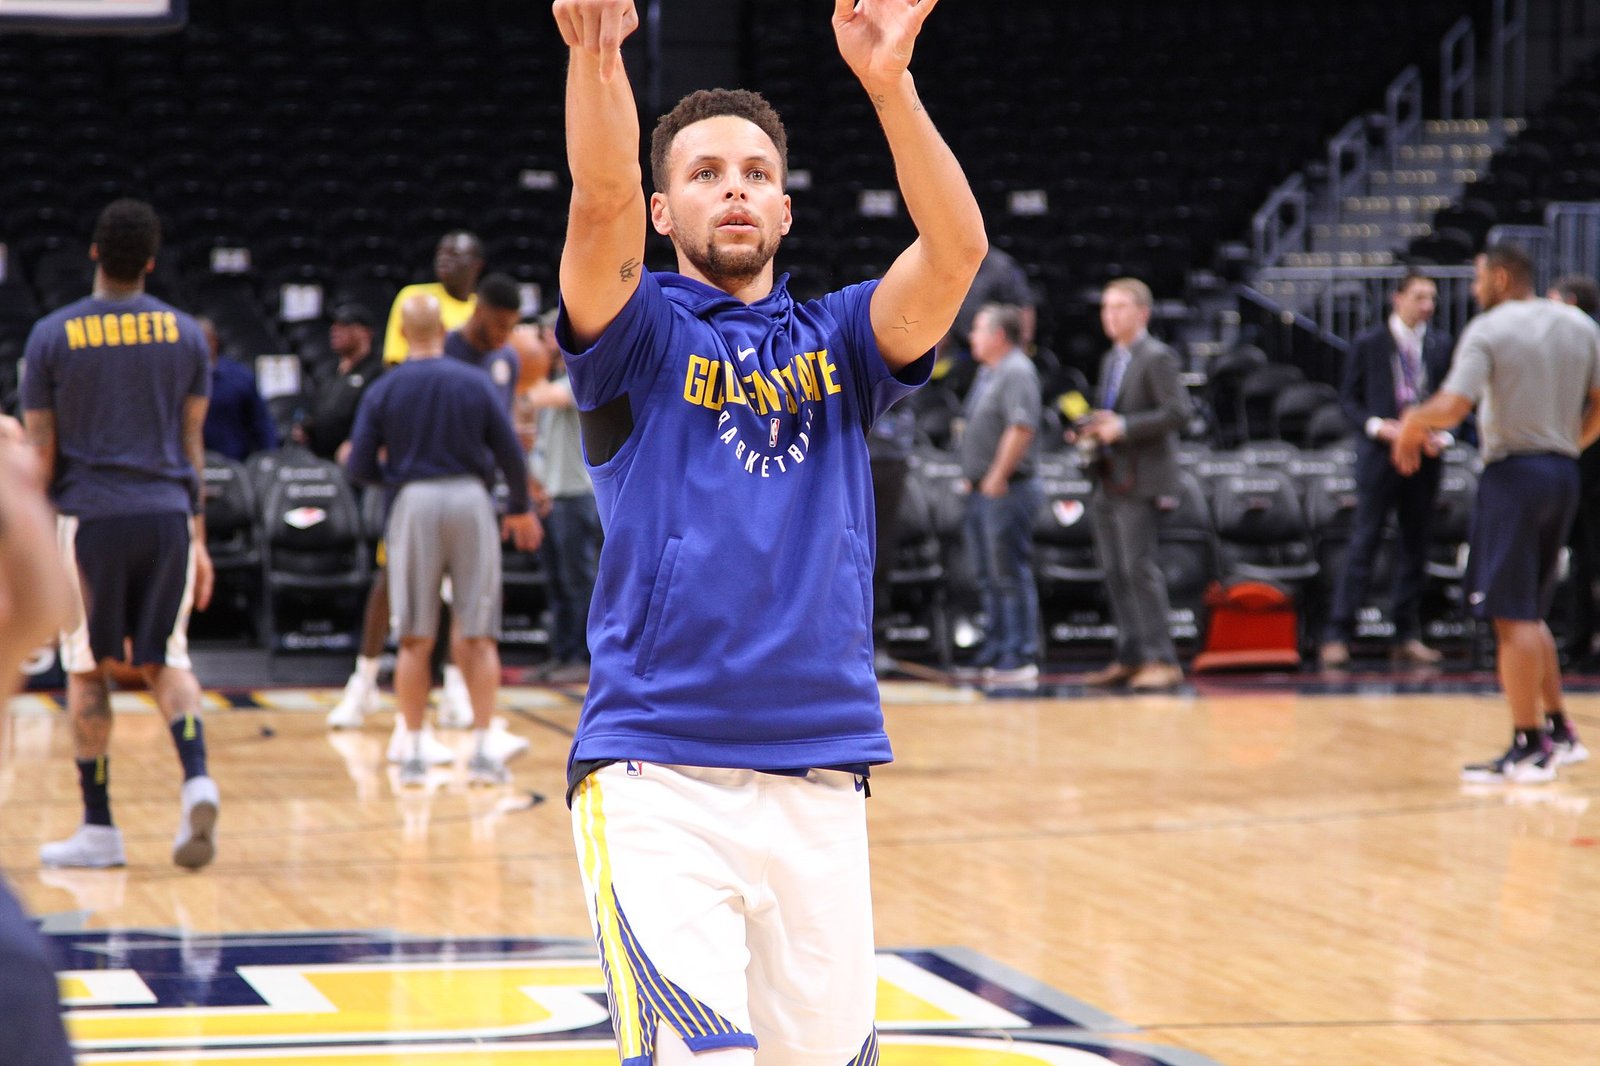 Stephen Curry shooting during warm ups